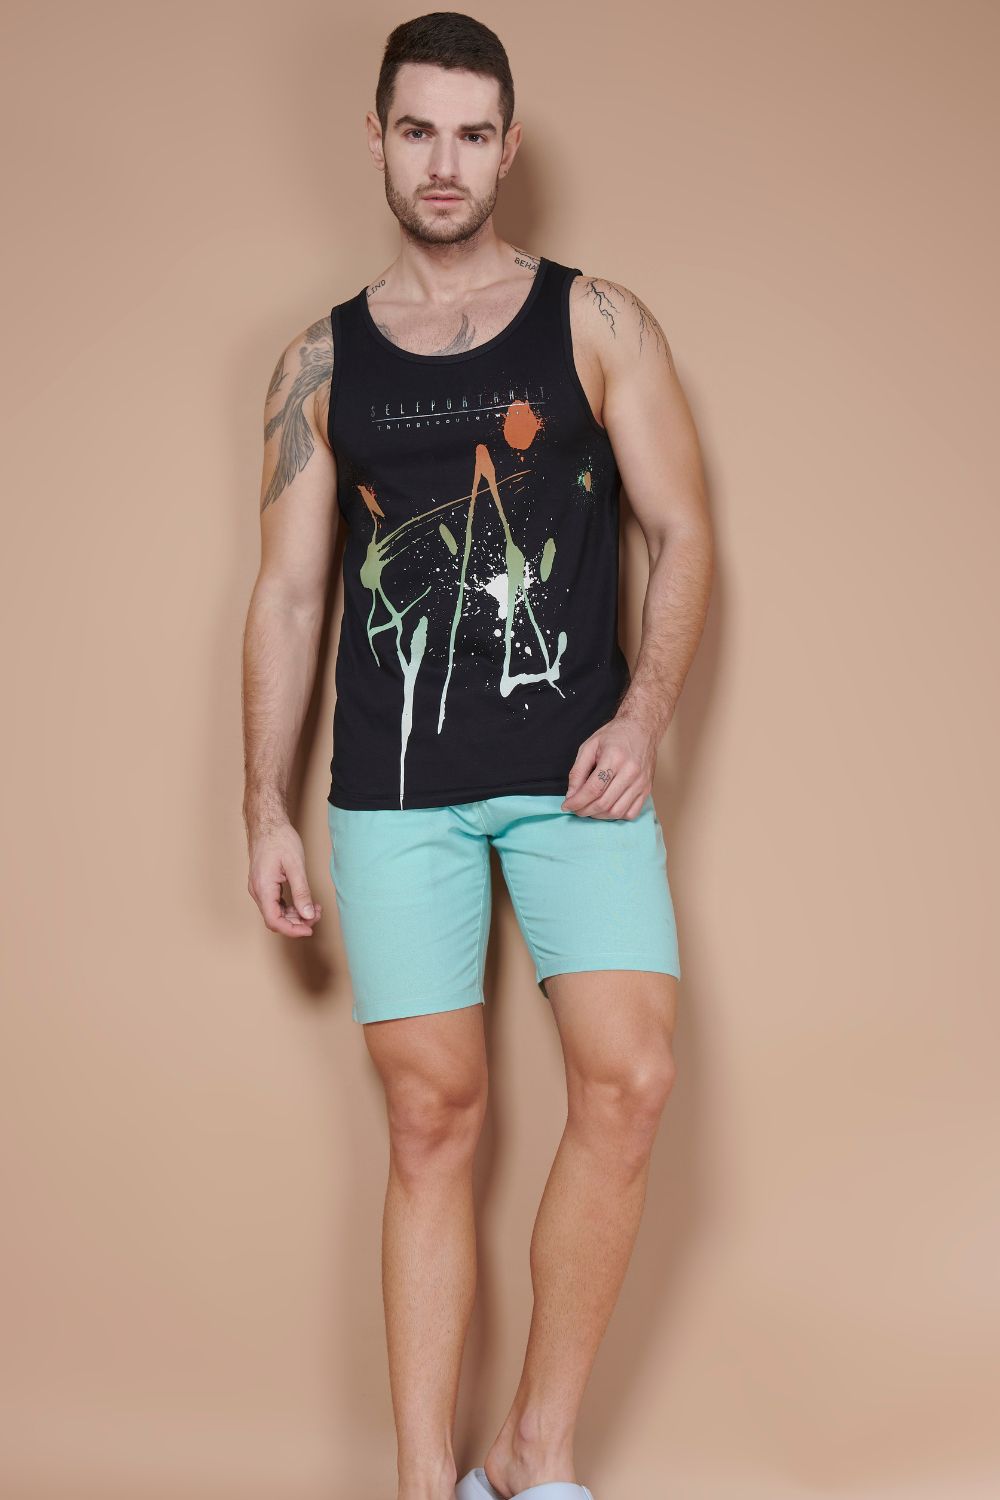 Black colored cotton Sleeveless Printed Tank Tees for men, front.